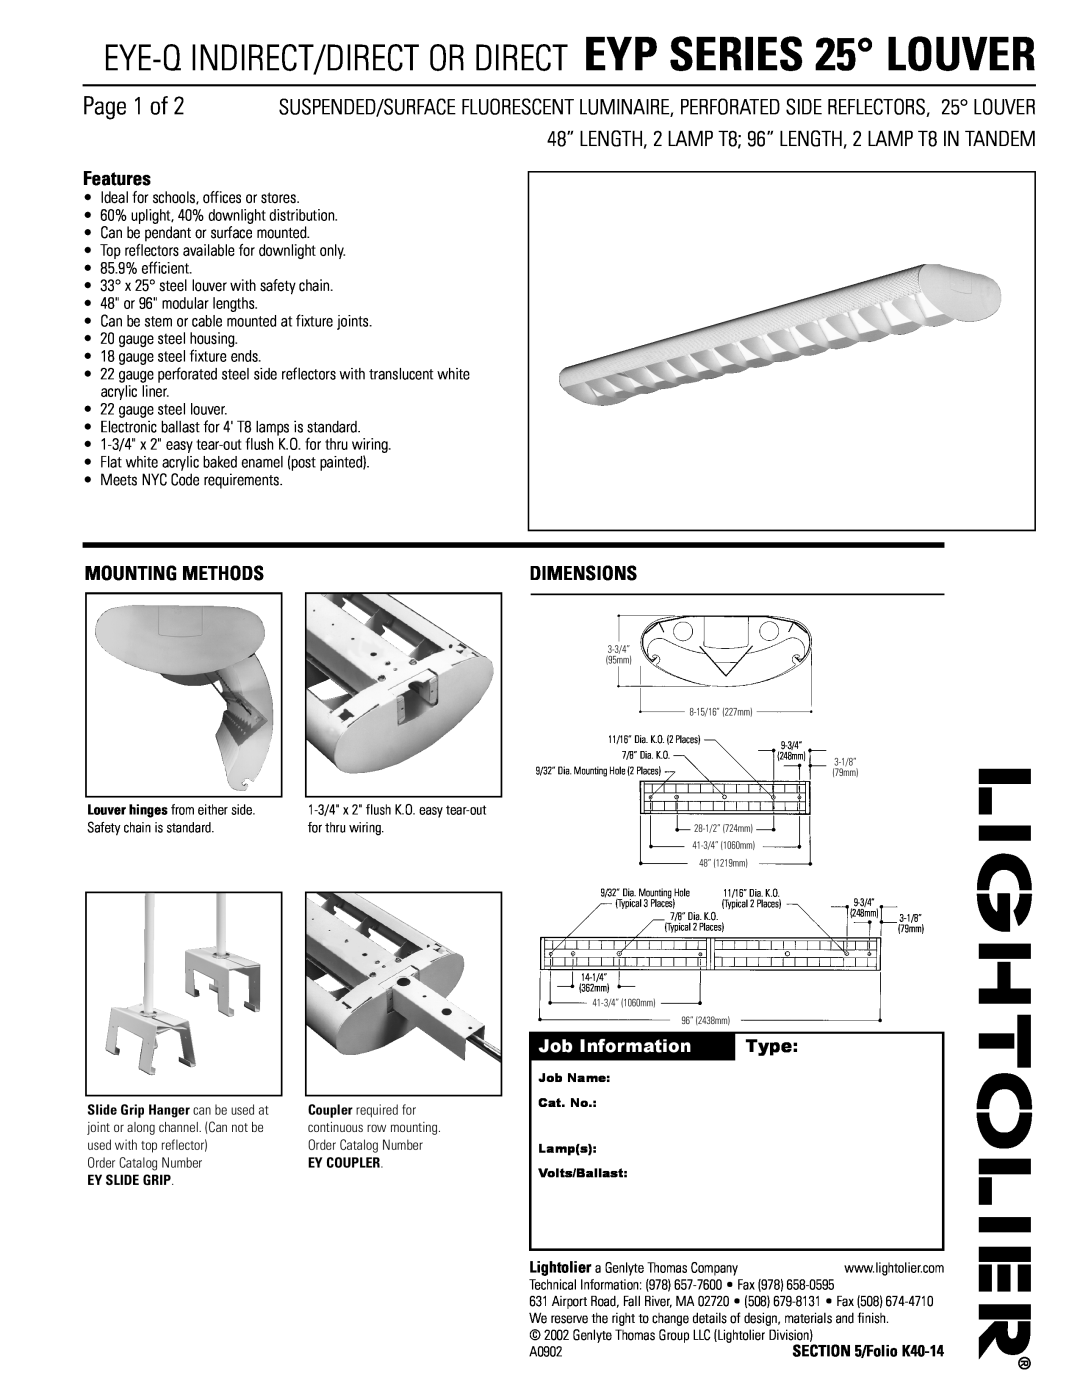 Lightolier EYP Series dimensions Page 1 of, Features, Mounting Methods, Dimensions, Job Information, Type 